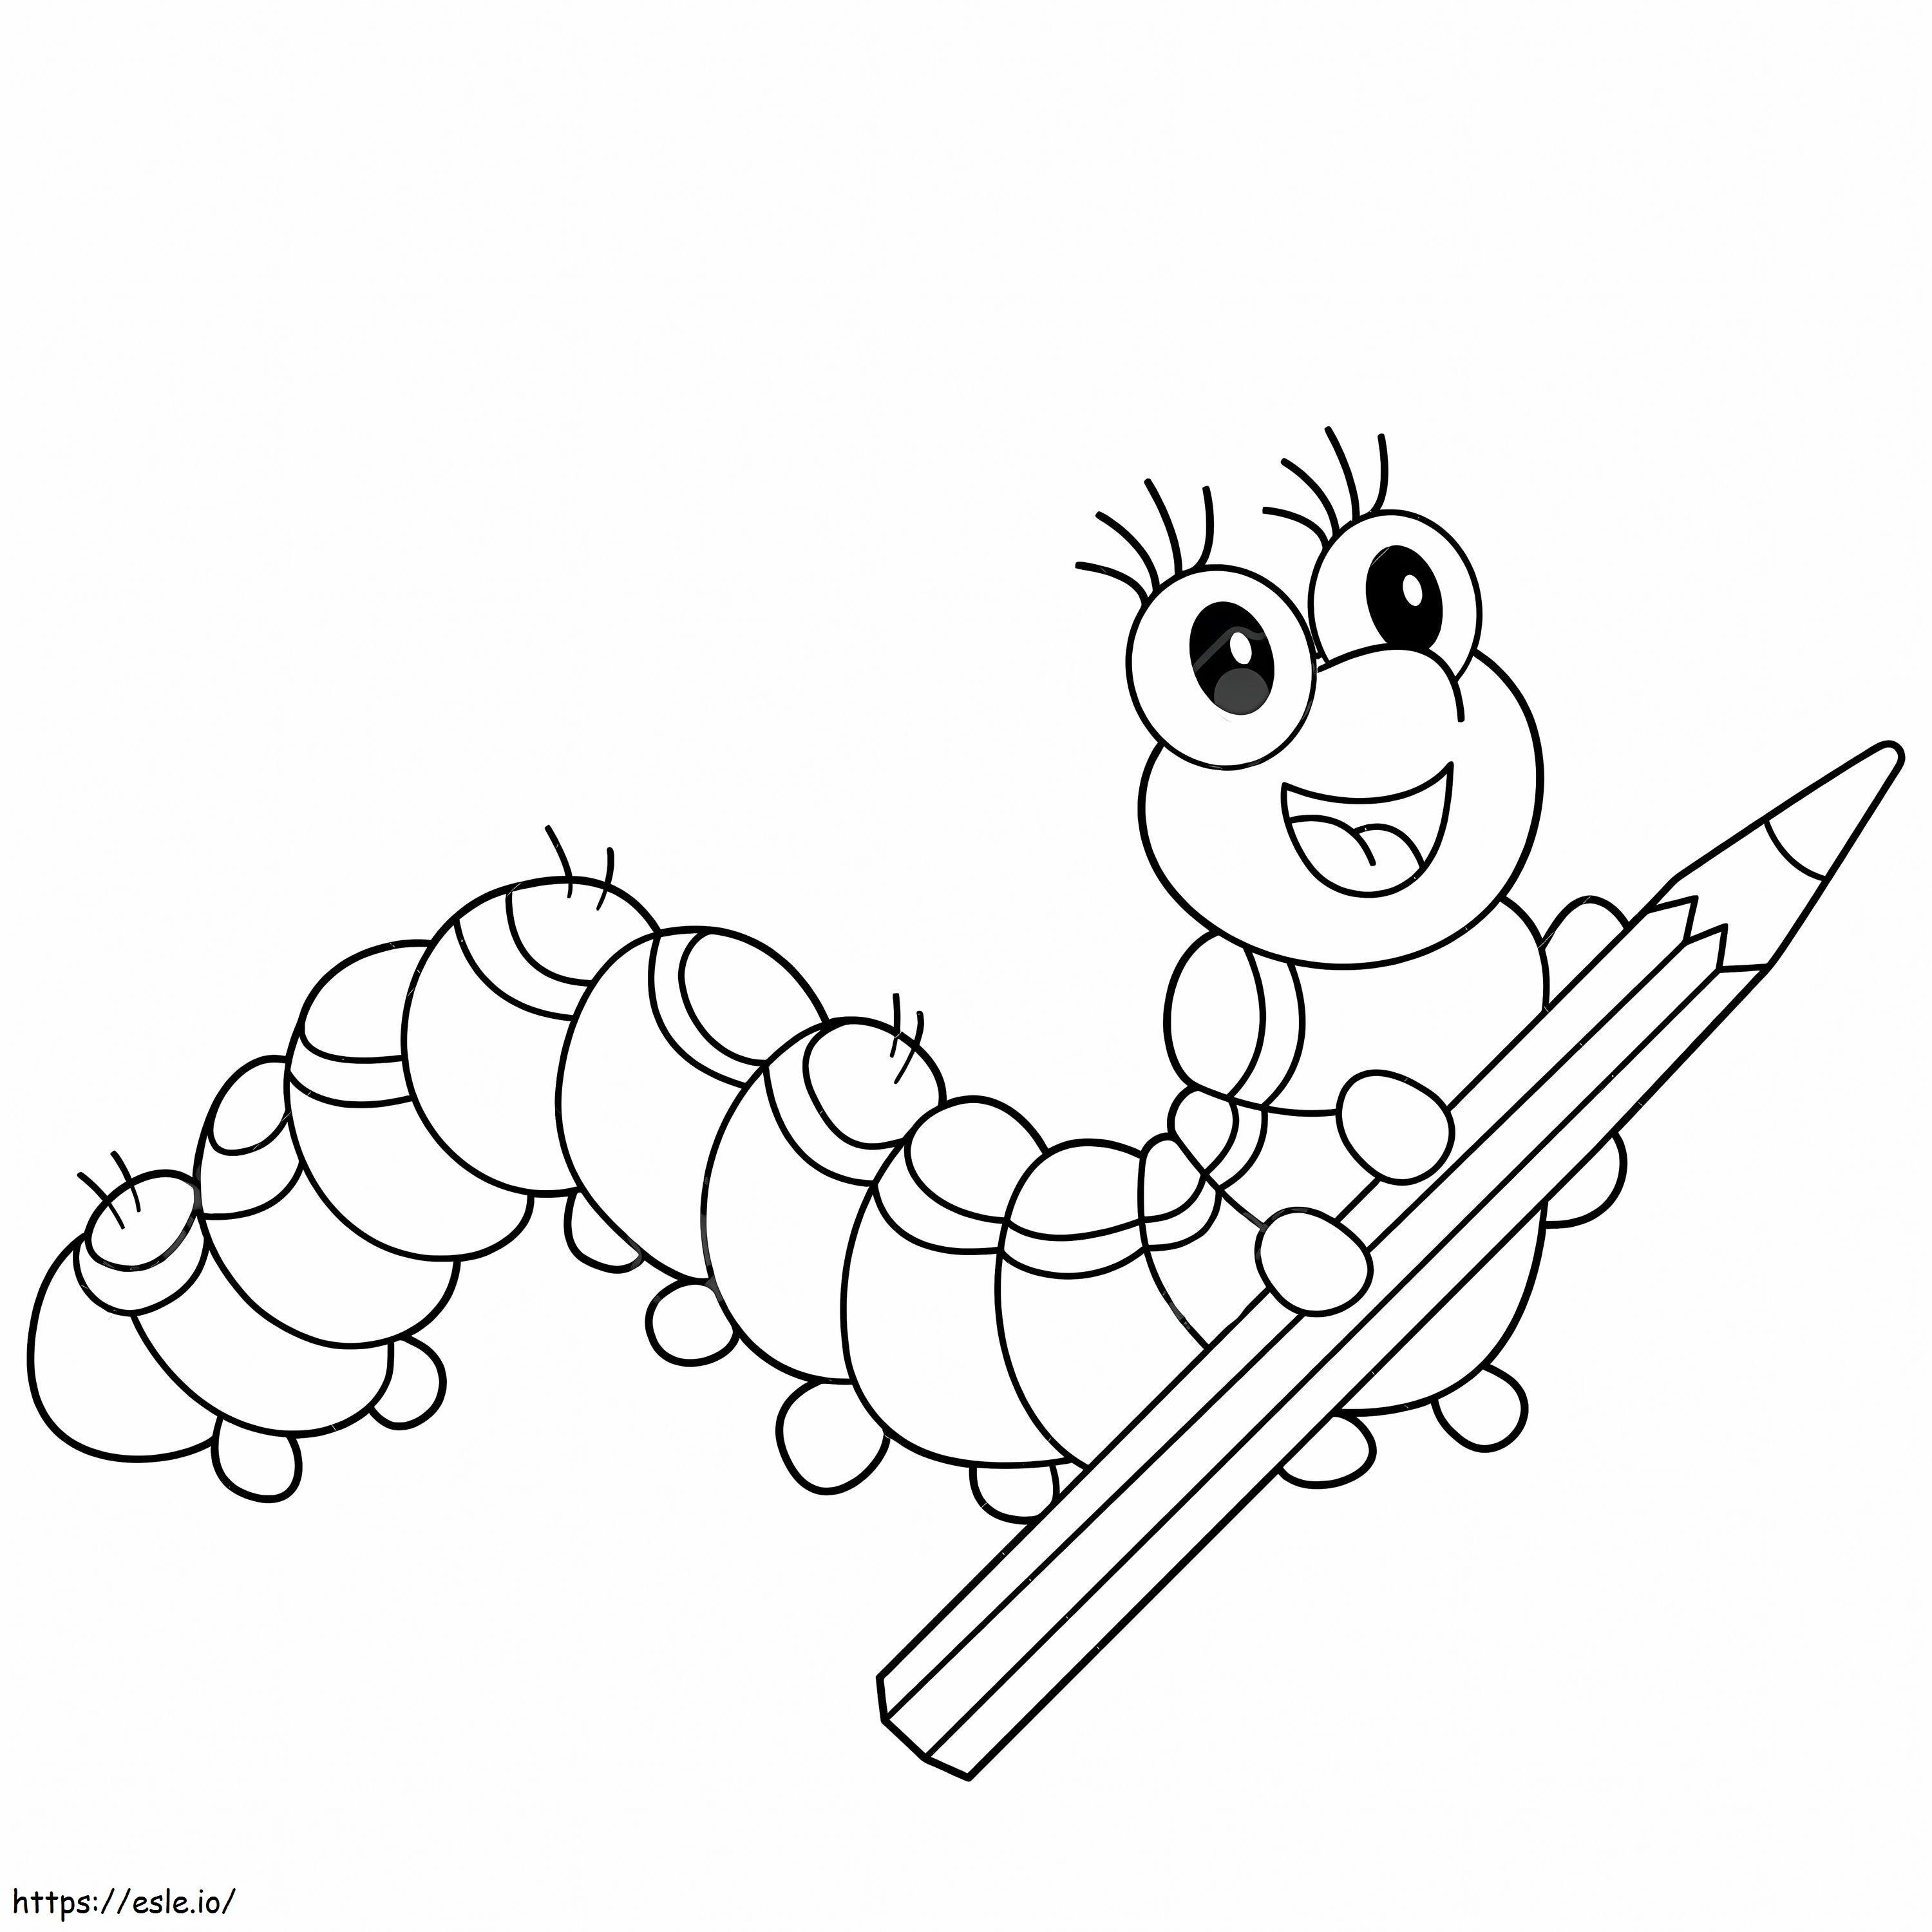 Bug And Pencil coloring page